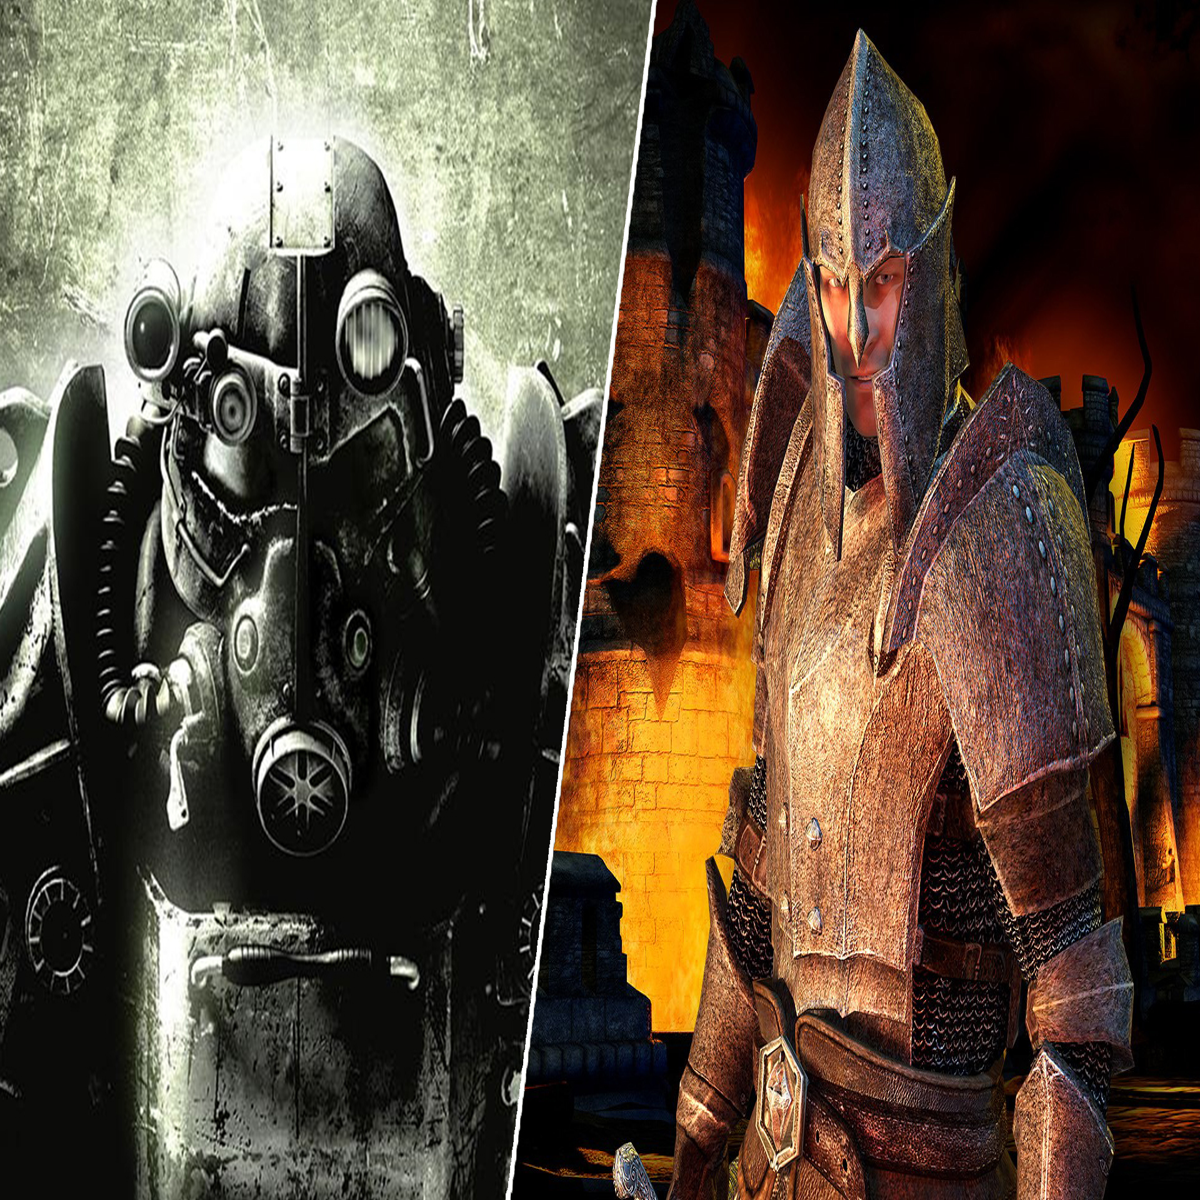 PS3 Classics Oblivion and Fallout 3 are Reportedly Being Remastered